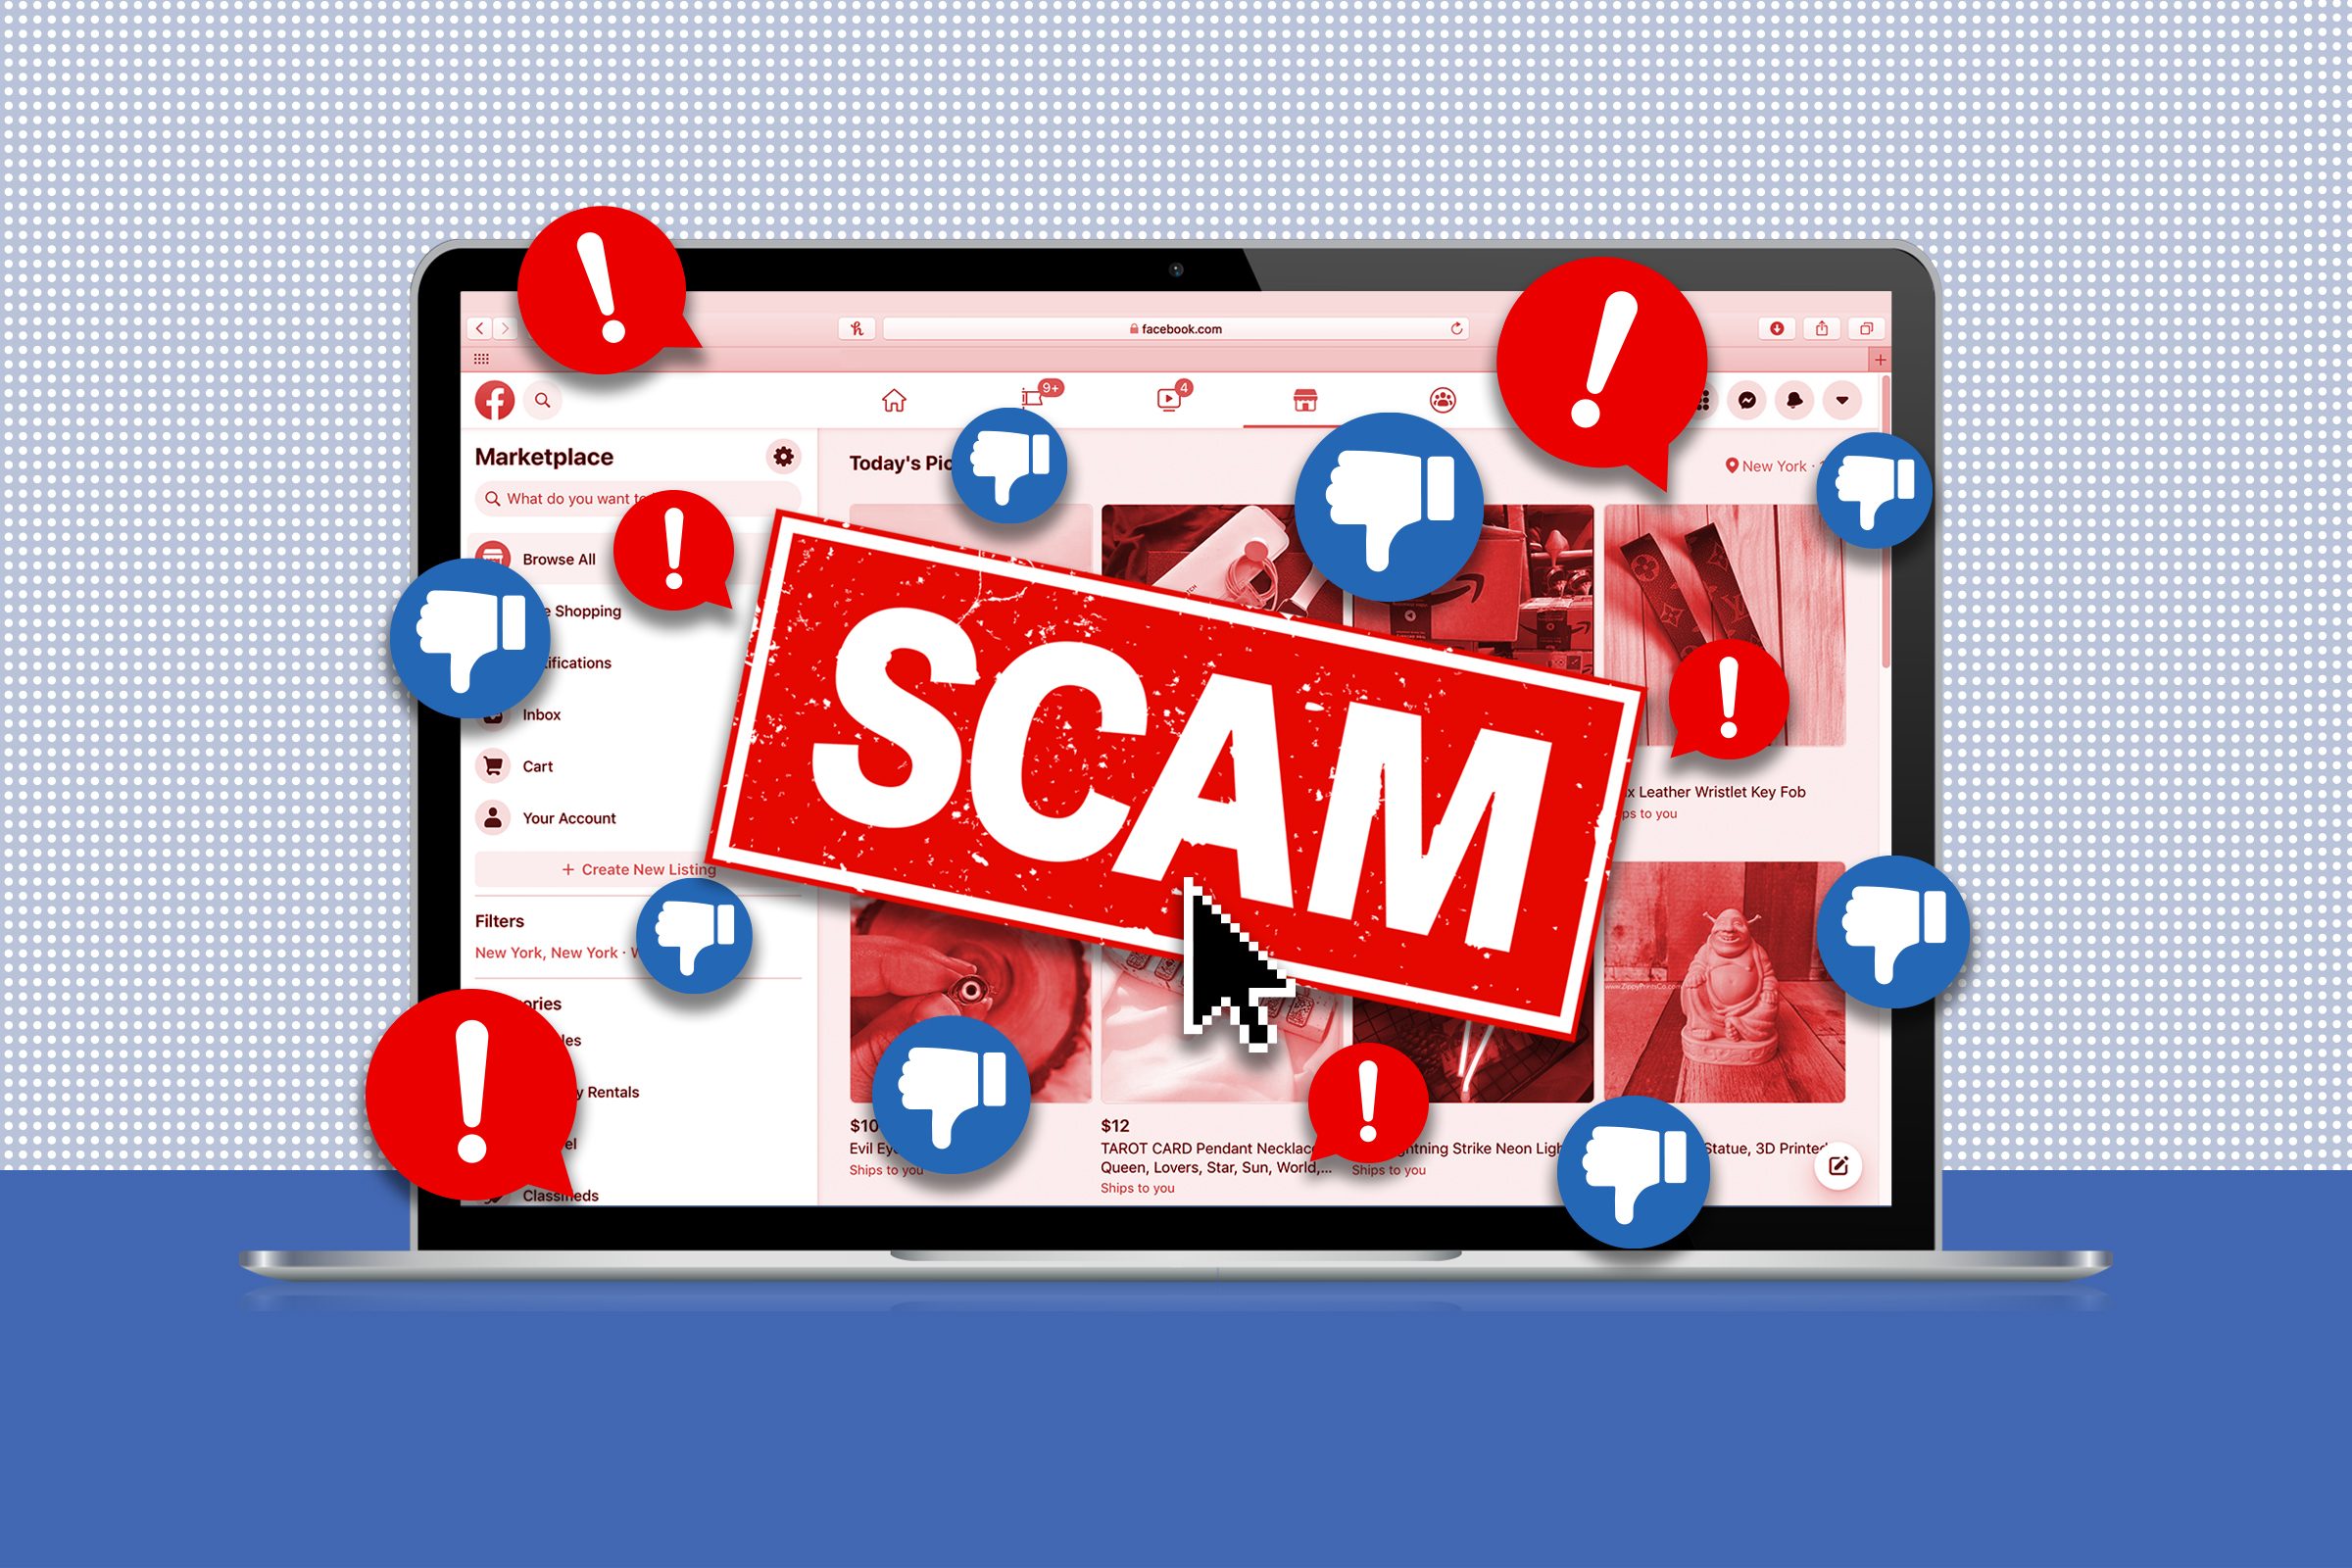 17 Facebook Scams You Need To Take Seriously